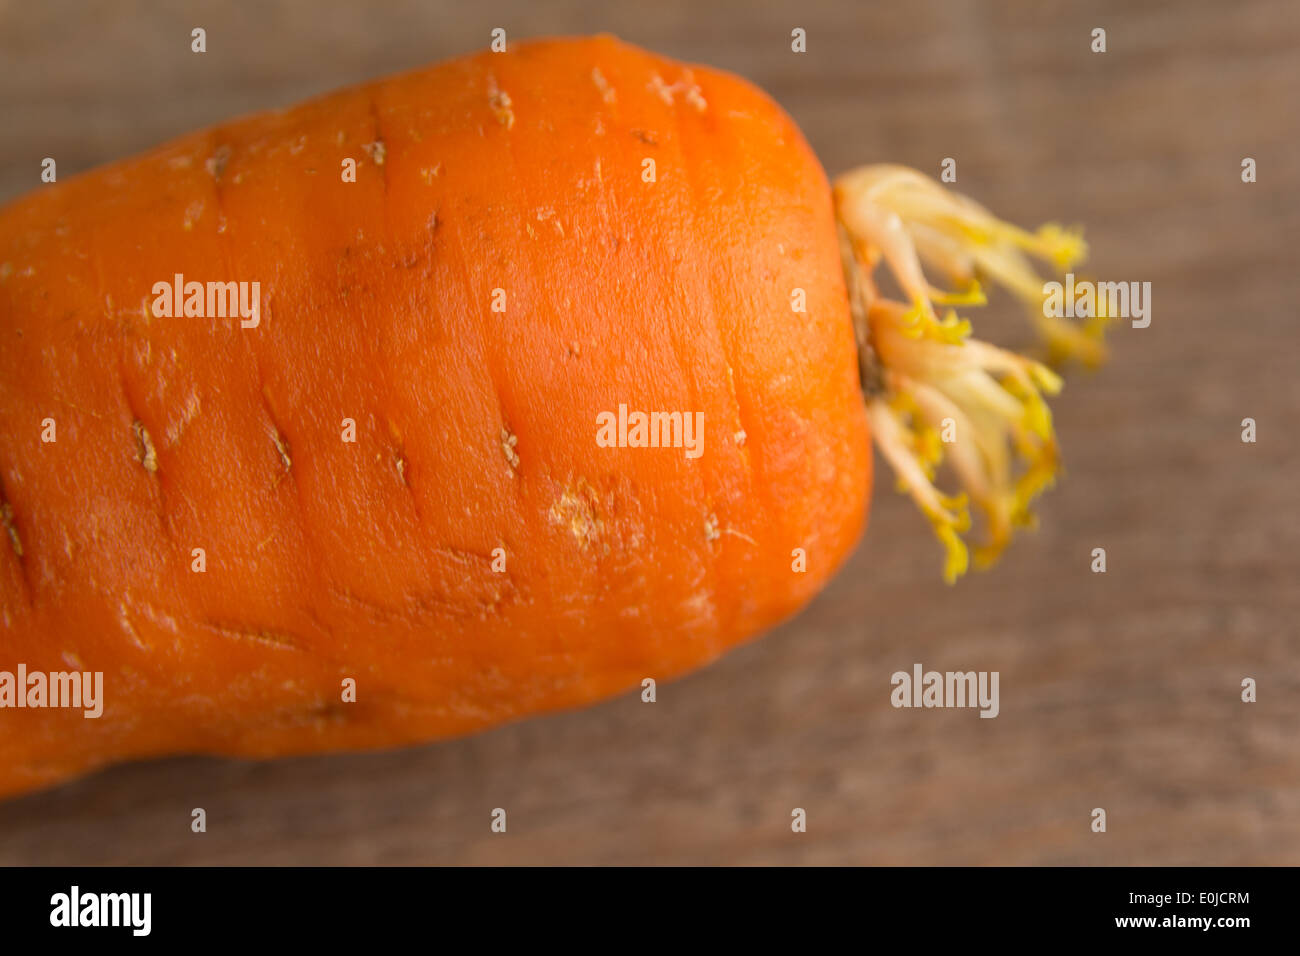 Old carrot on wood Stock Photo